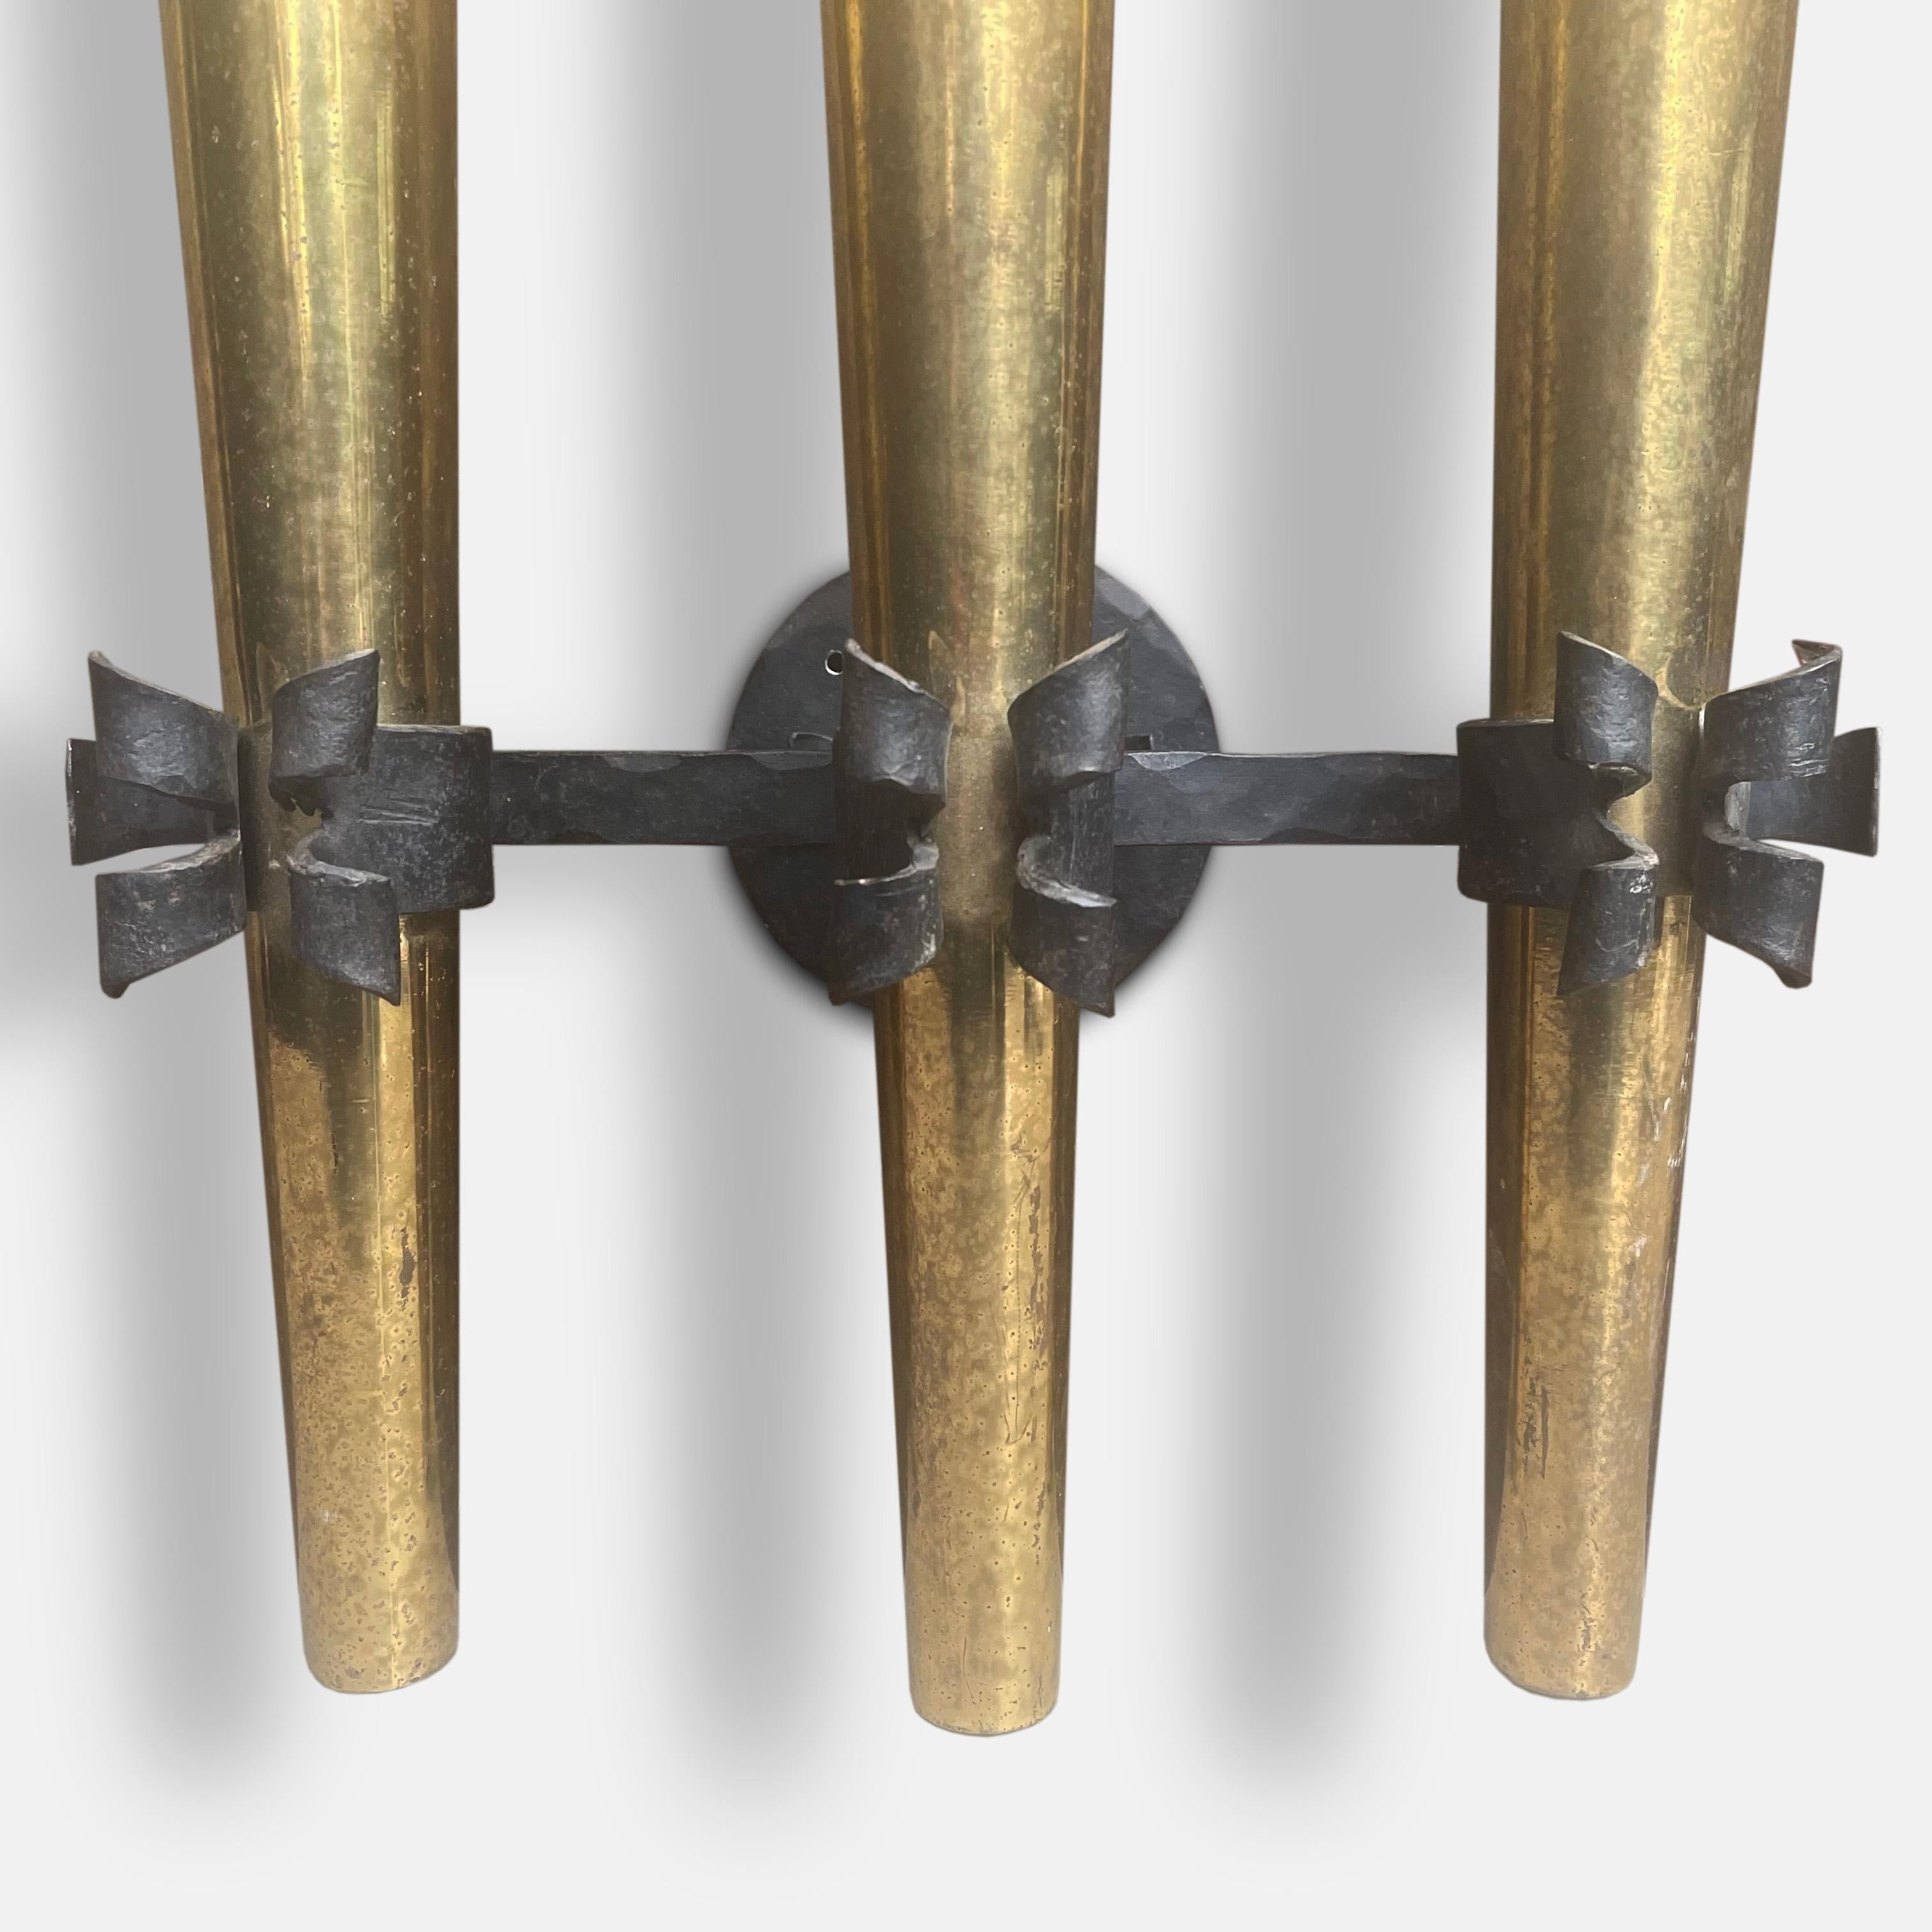 1950s French Brass and Wrought Iron Torchière Wall Sconce In Good Condition For Sale In London, GB